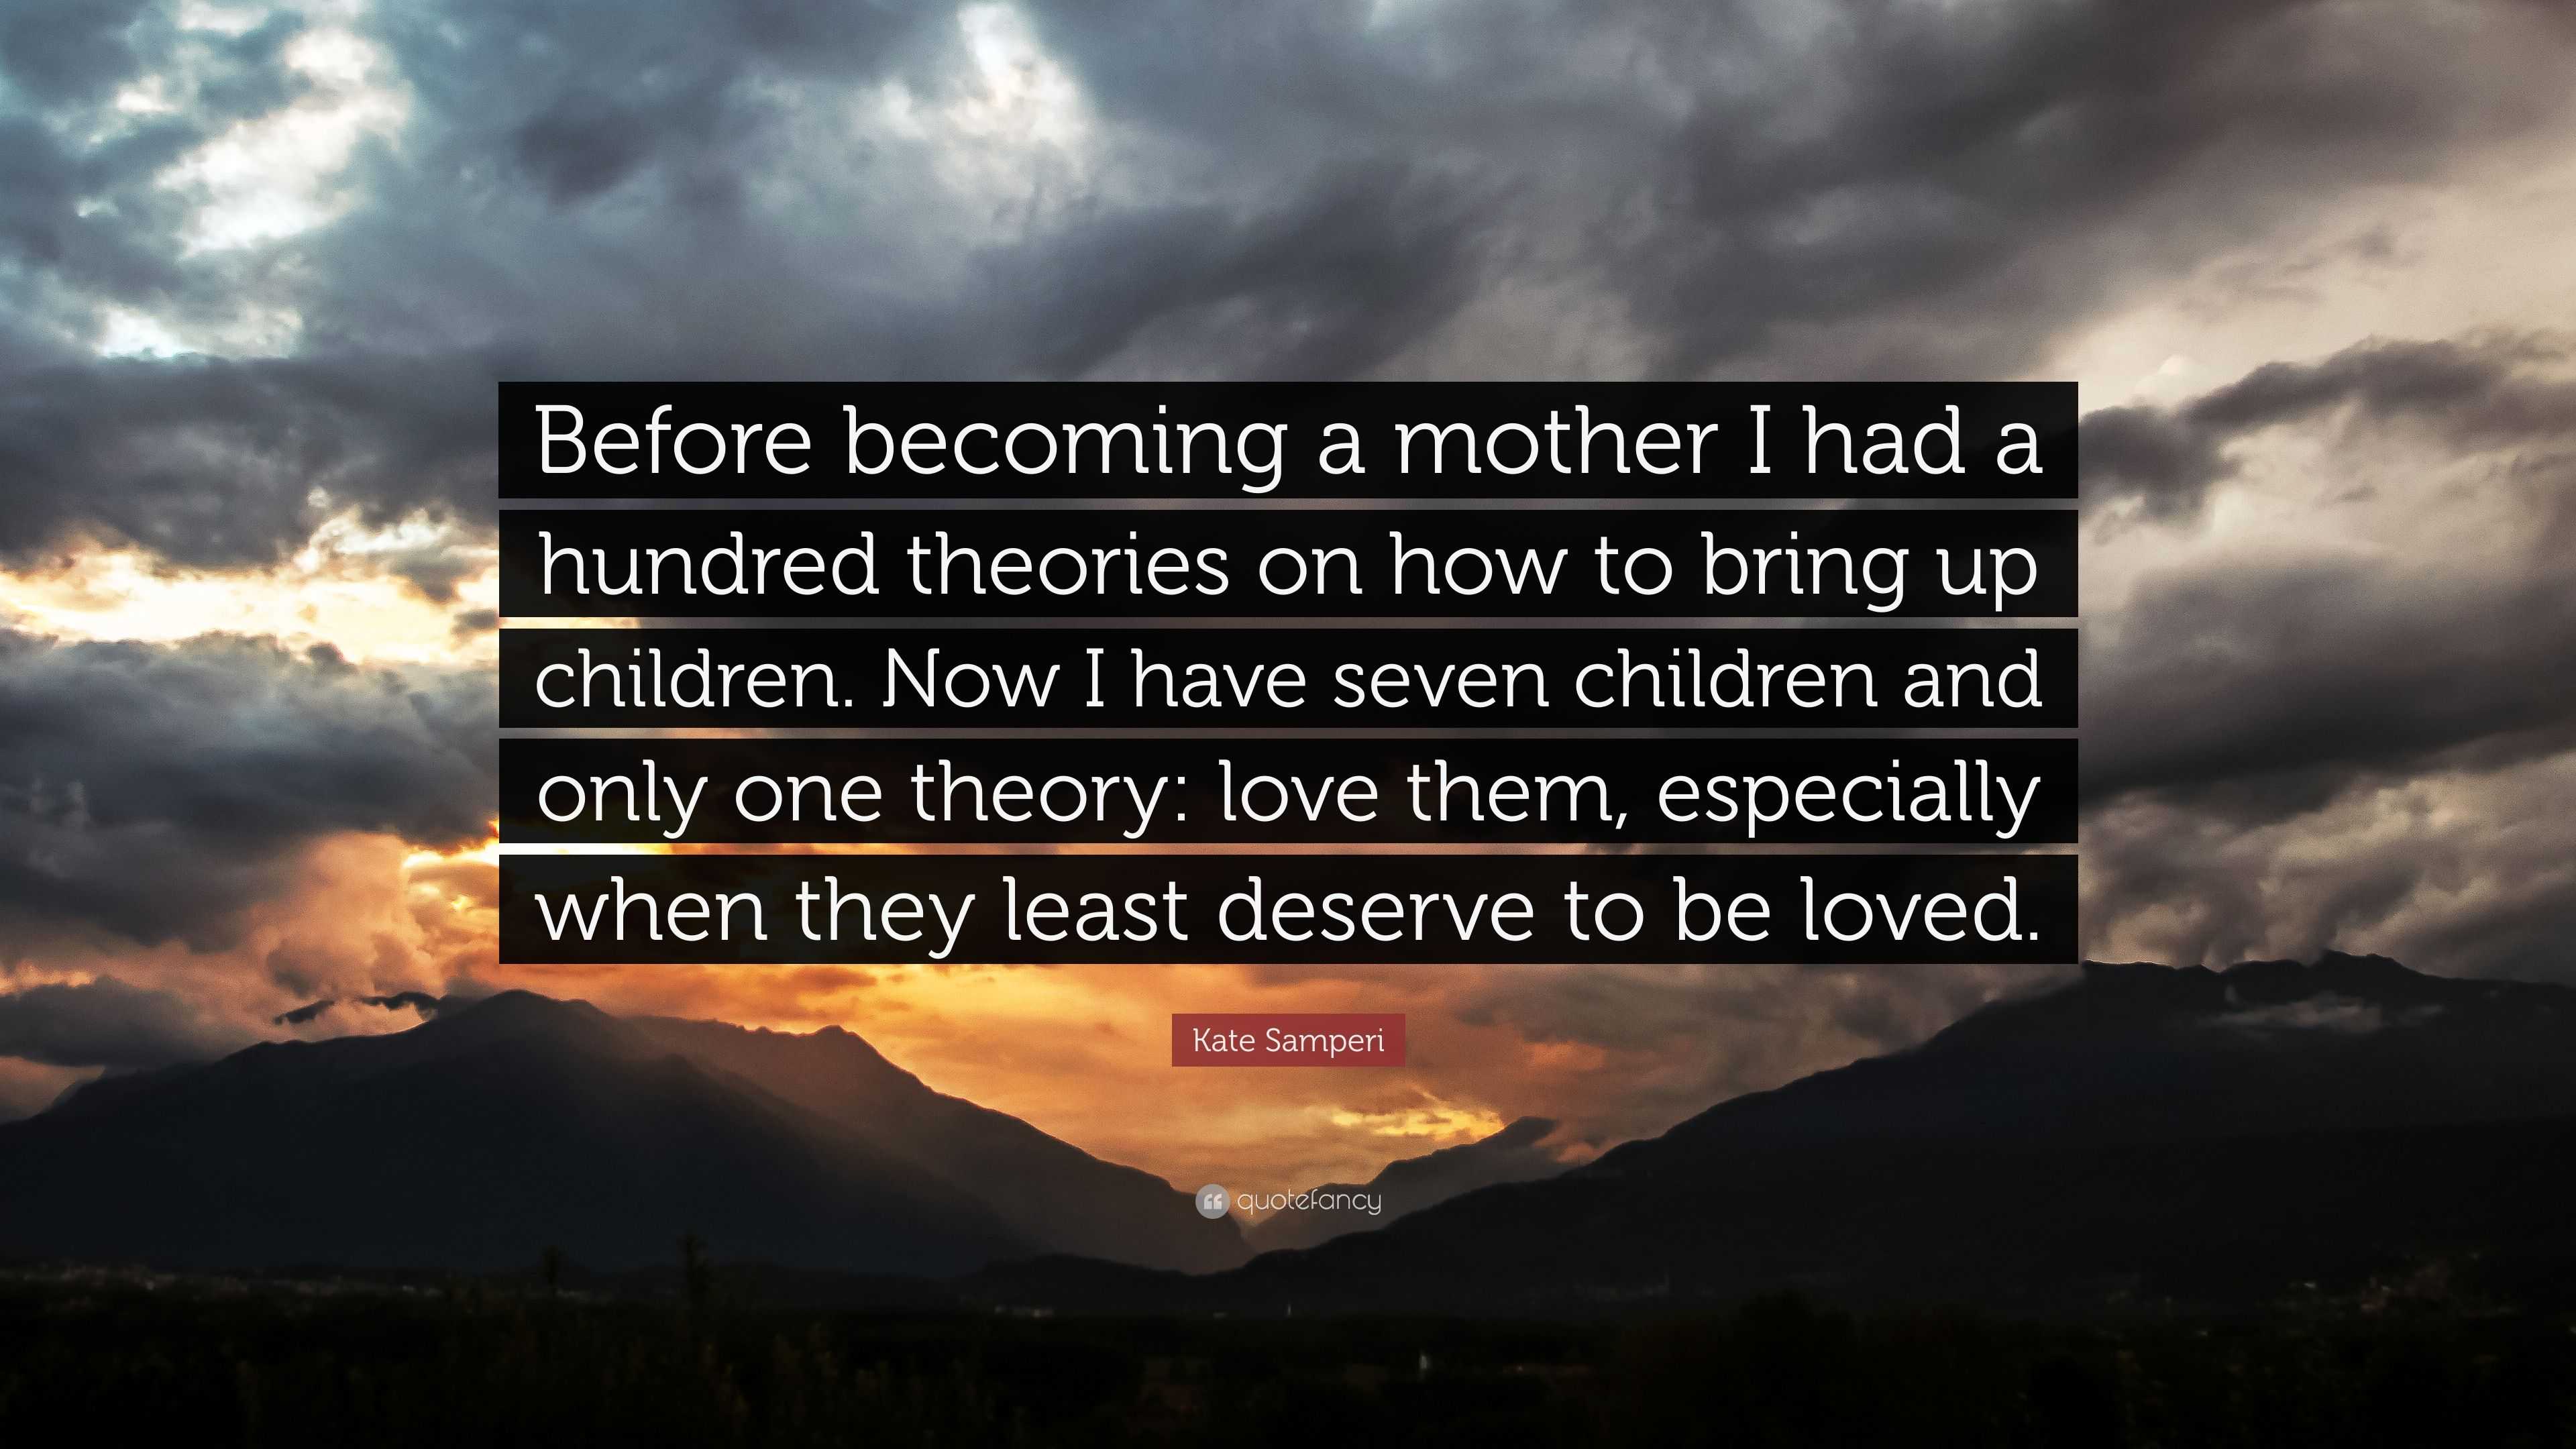 Kate Samperi Quote: “Before becoming a mother I had a hundred theories ...